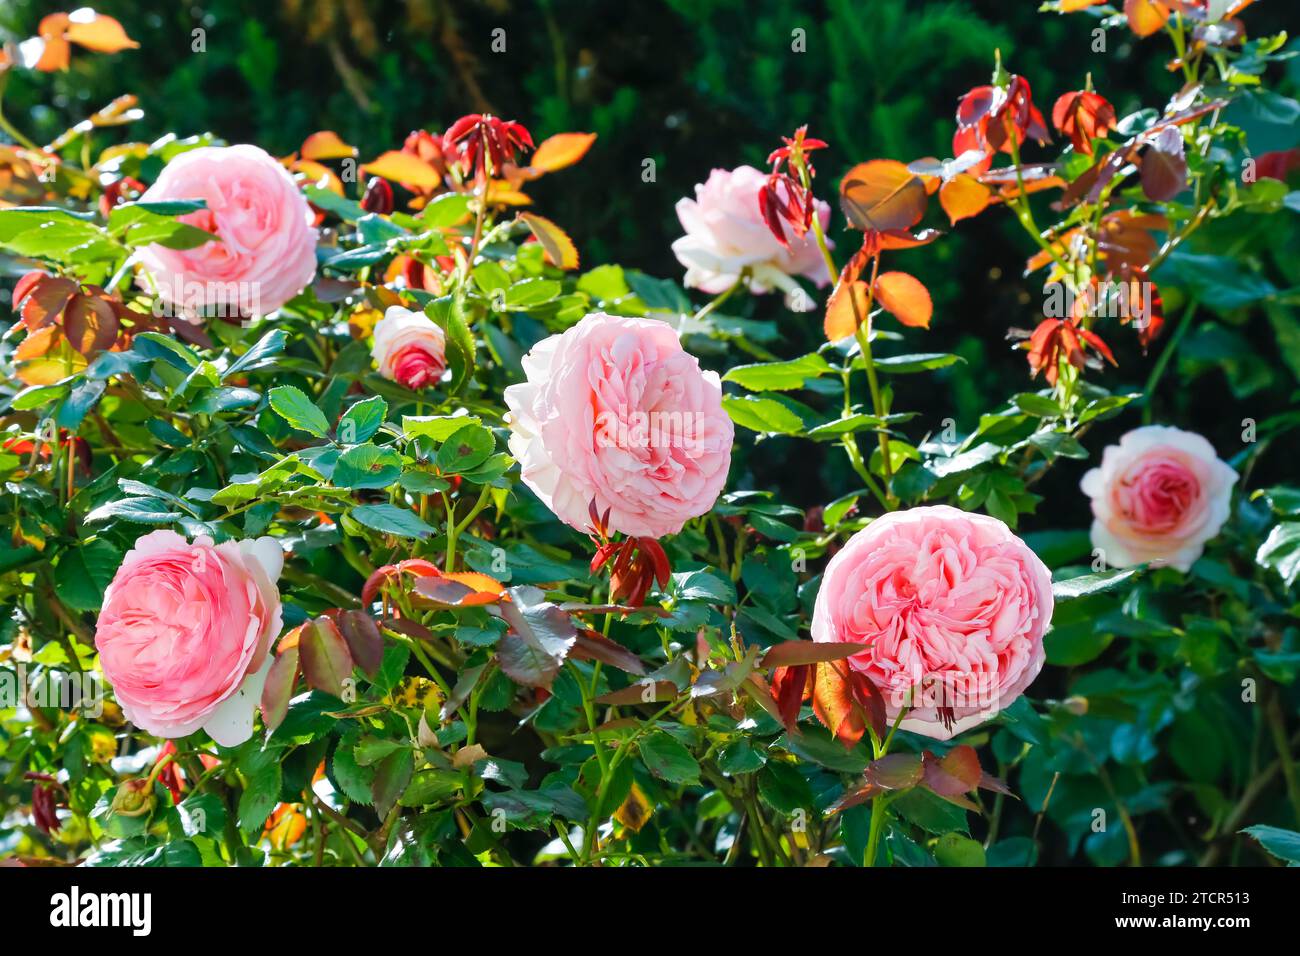 Roses (pink), blossom, dark green foliage, perennials, flowers, pink blossoms, garden, bed, Germany Stock Photo